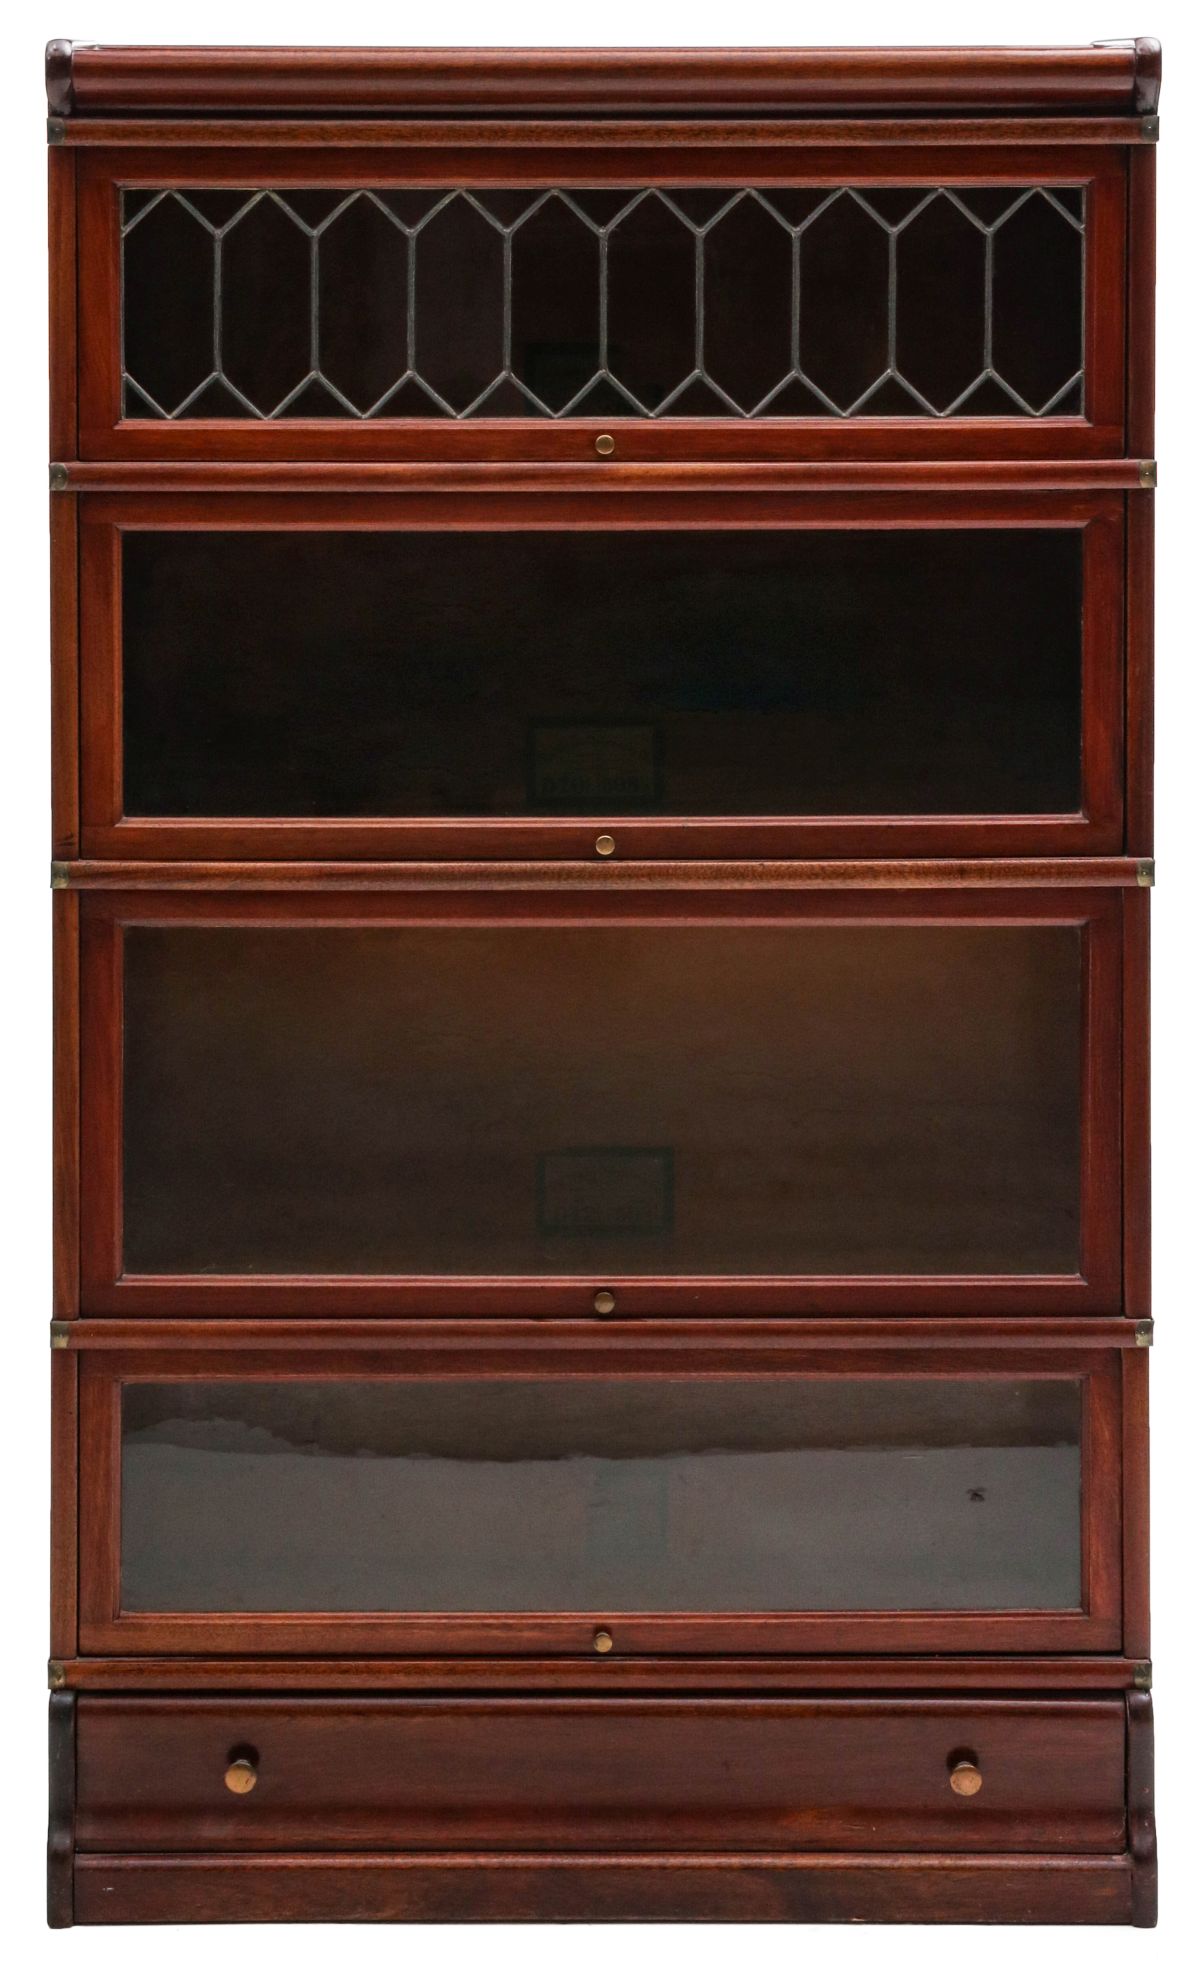 A GLOBE WERNICKE MAHOGANY STACK BOOK CASE WITH LEADING